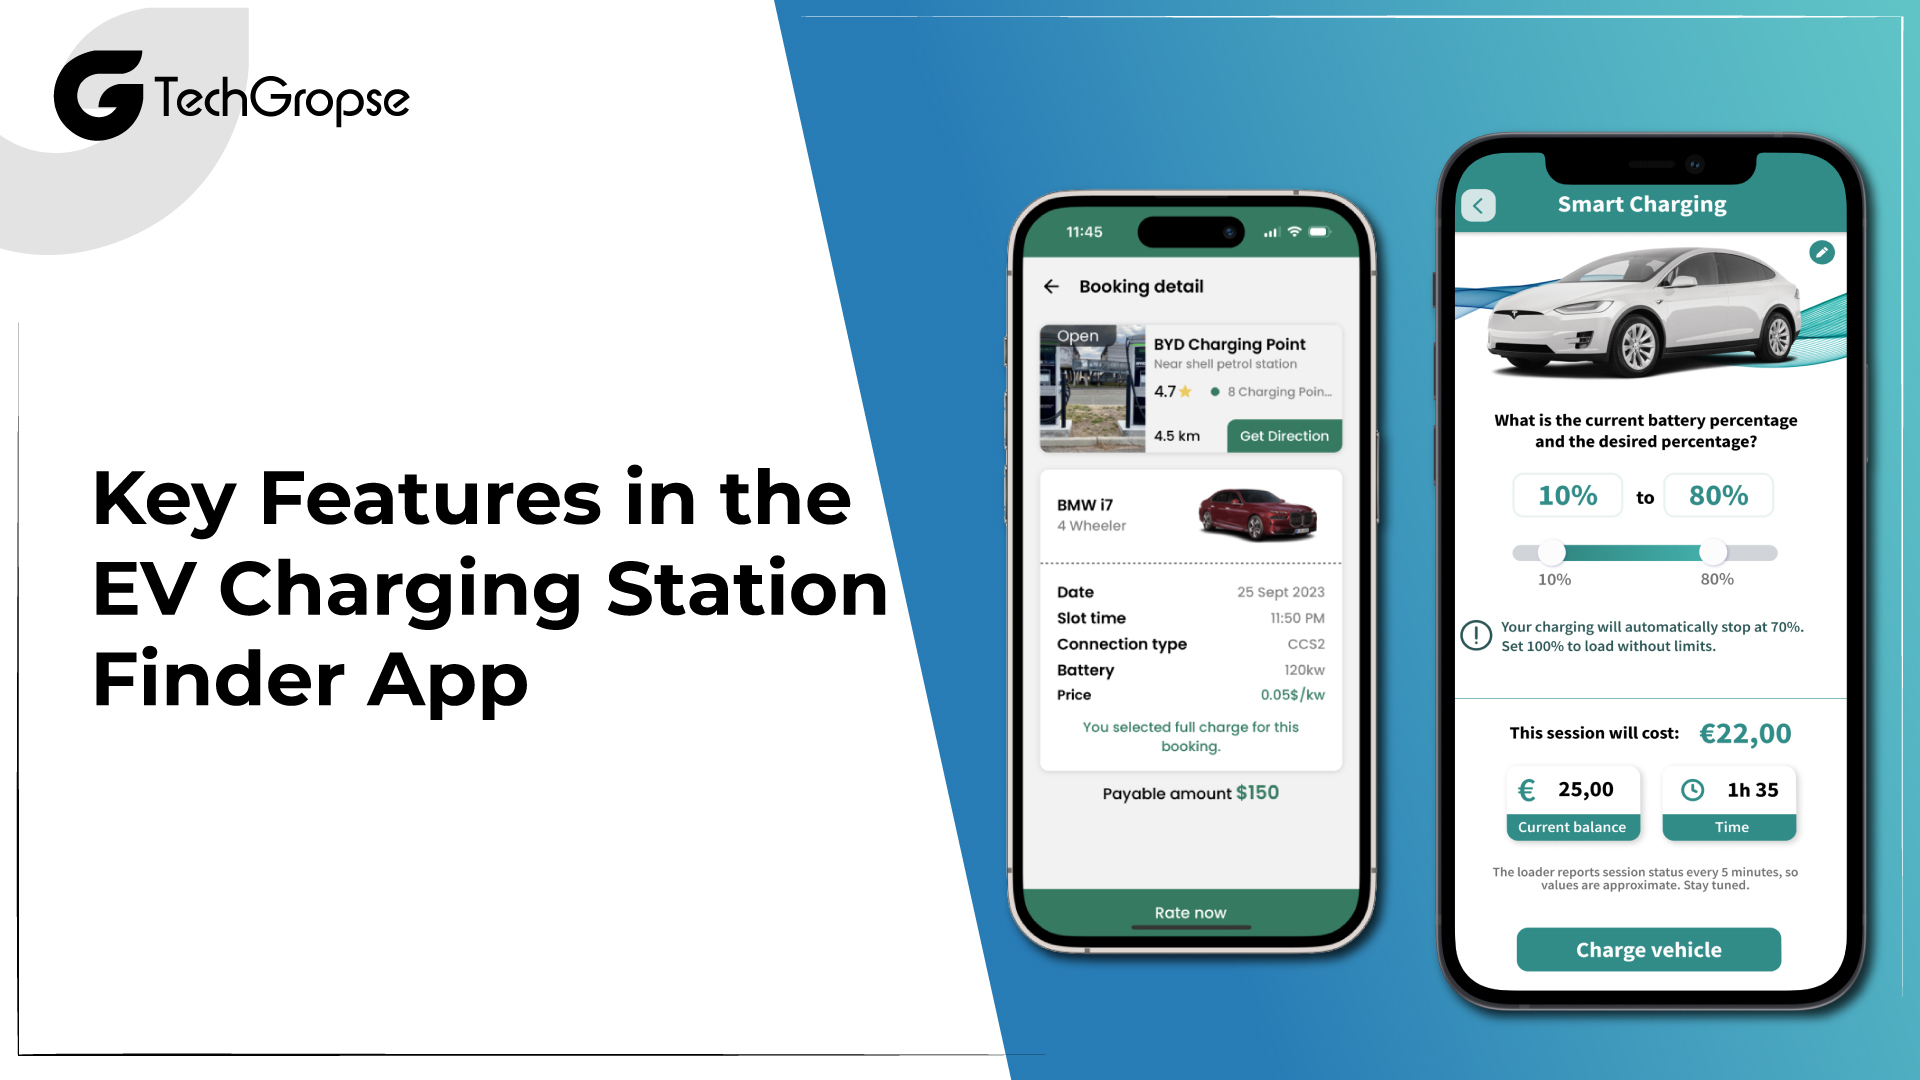 Key Features in the EV Charging Station Finder App